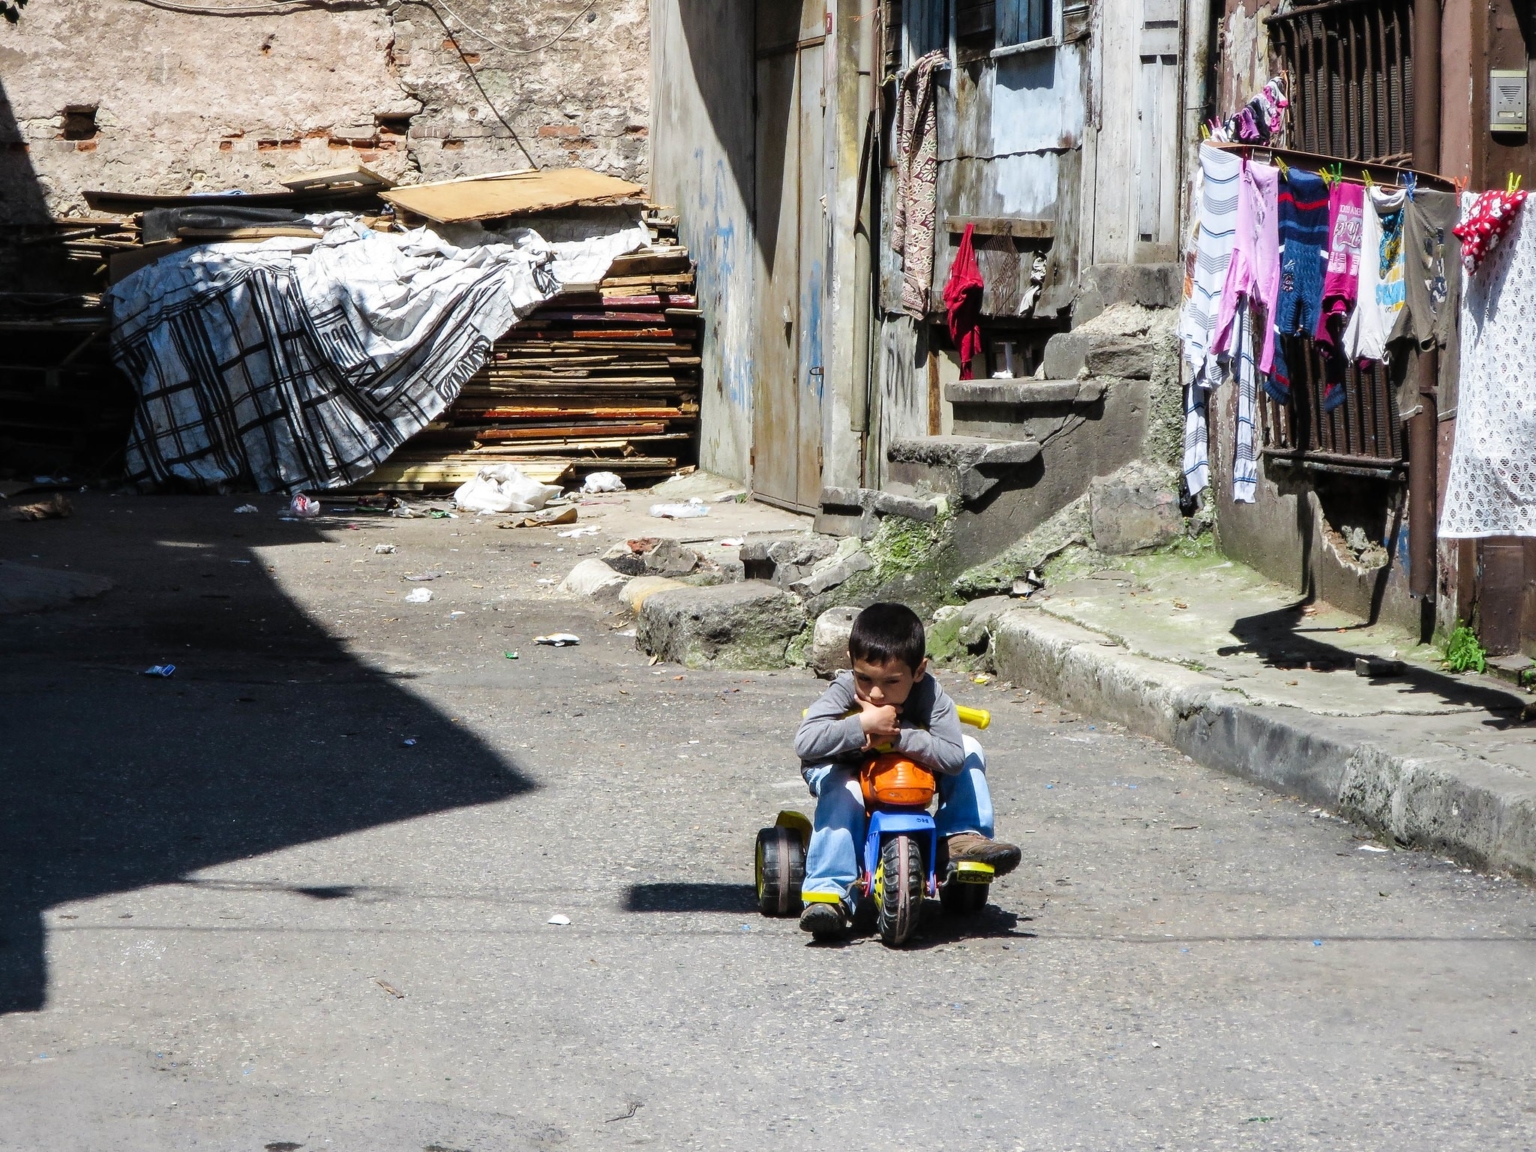 Poverty in Turkey Worsening and In Need of Assistance